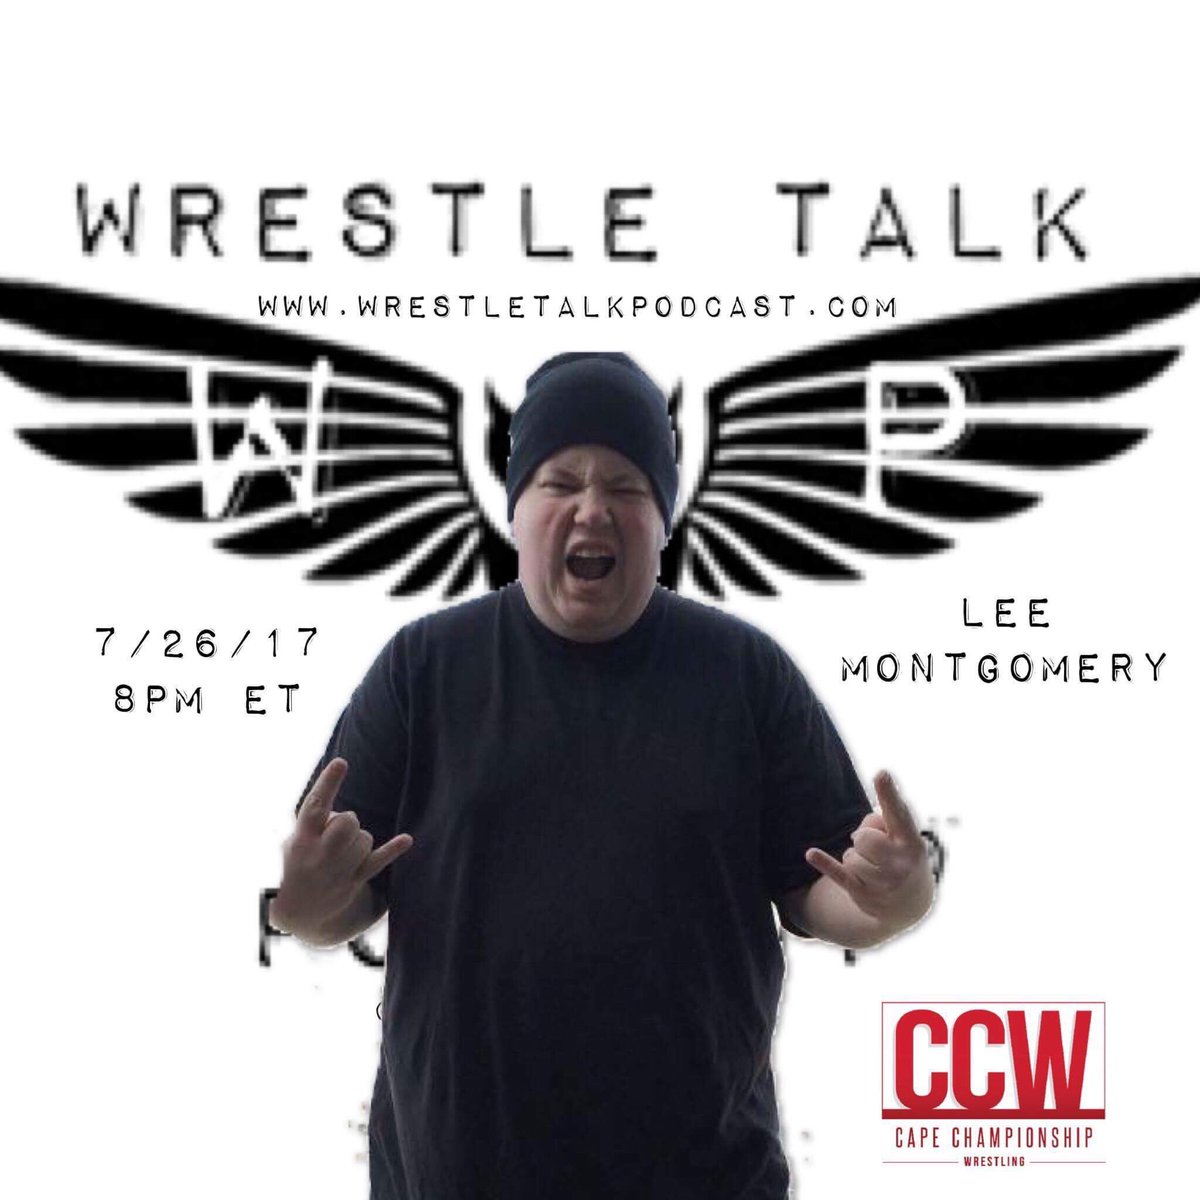 Wednesday Night, @biglee756  Will Be On @WrestleTalkCast At 8:30pm Talking #CCWAnniversary! Tune In & Call In! Get Your Questions Answered!